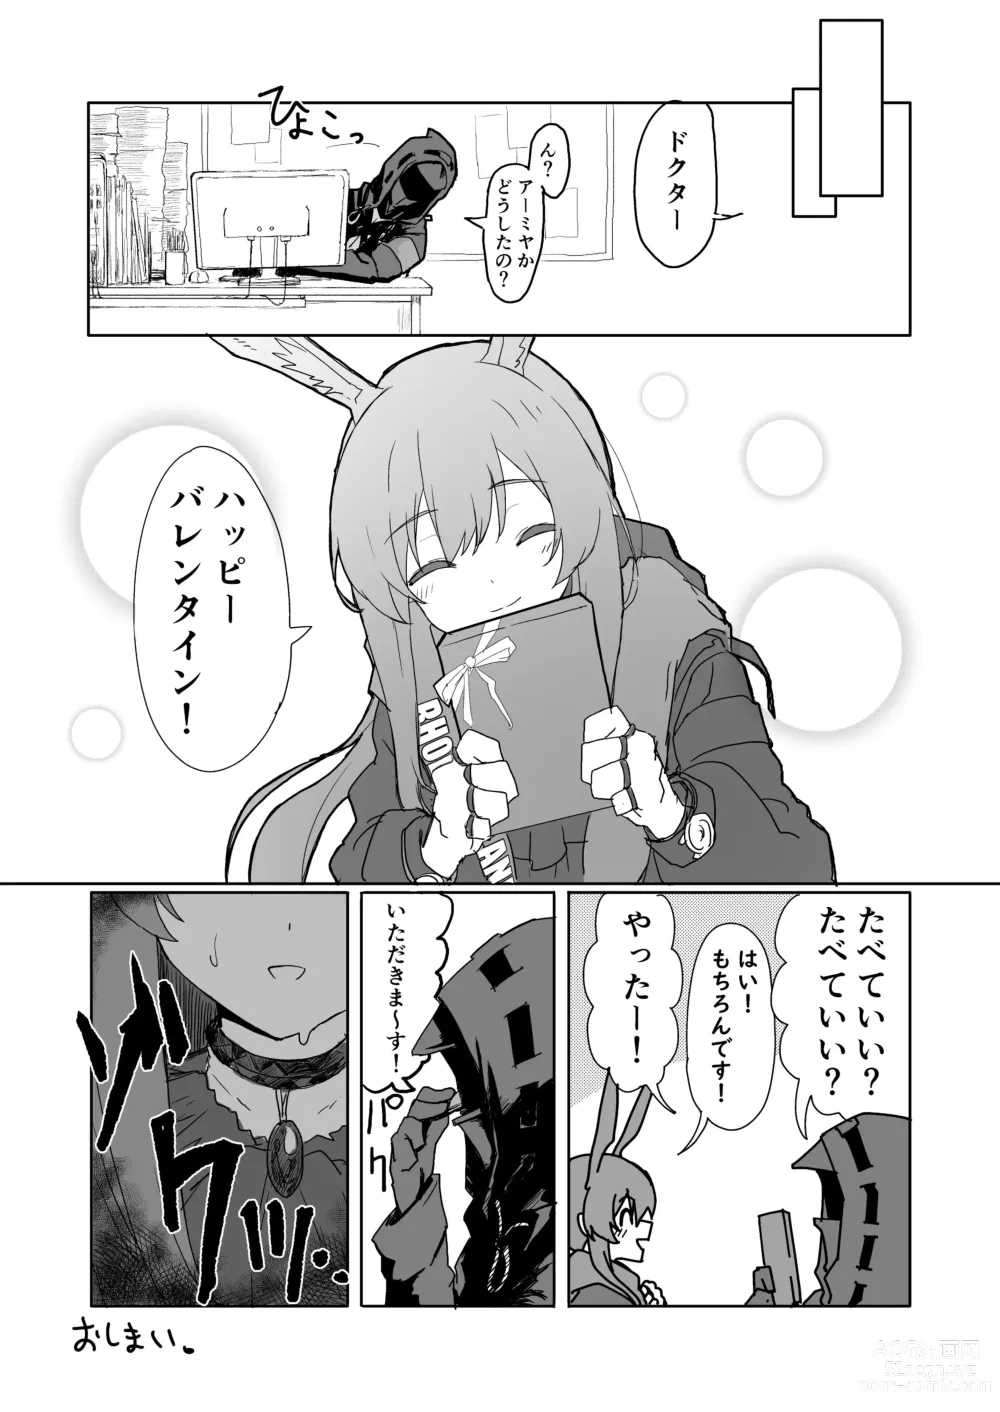 Page 17 of doujinshi Twitter collection